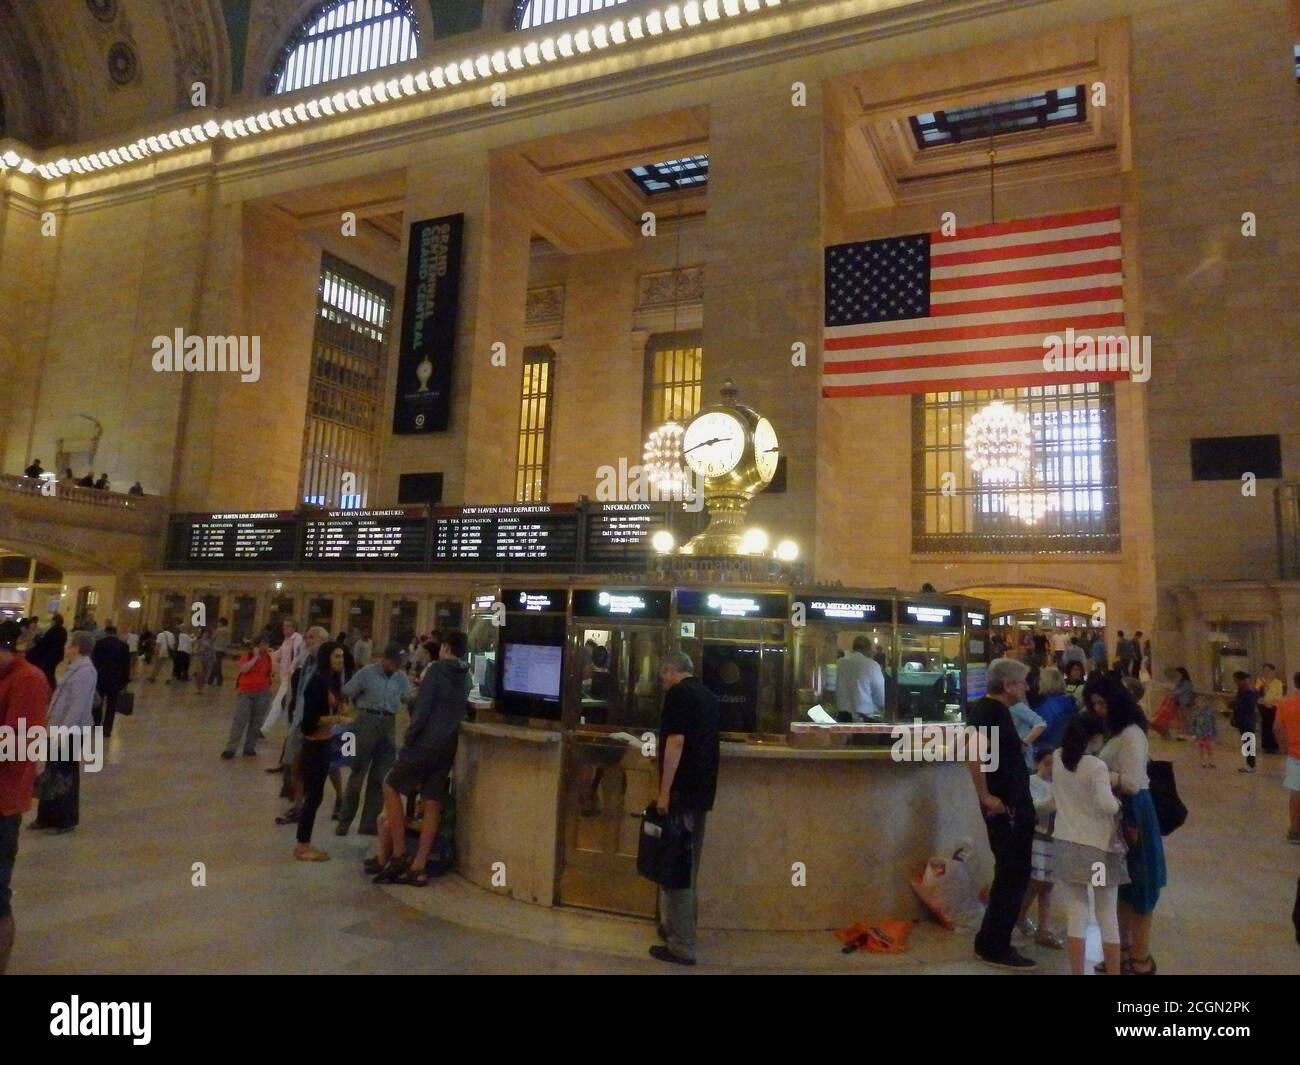 Grand Central Terminal information desk and clock, New York City, United States Stock Photo